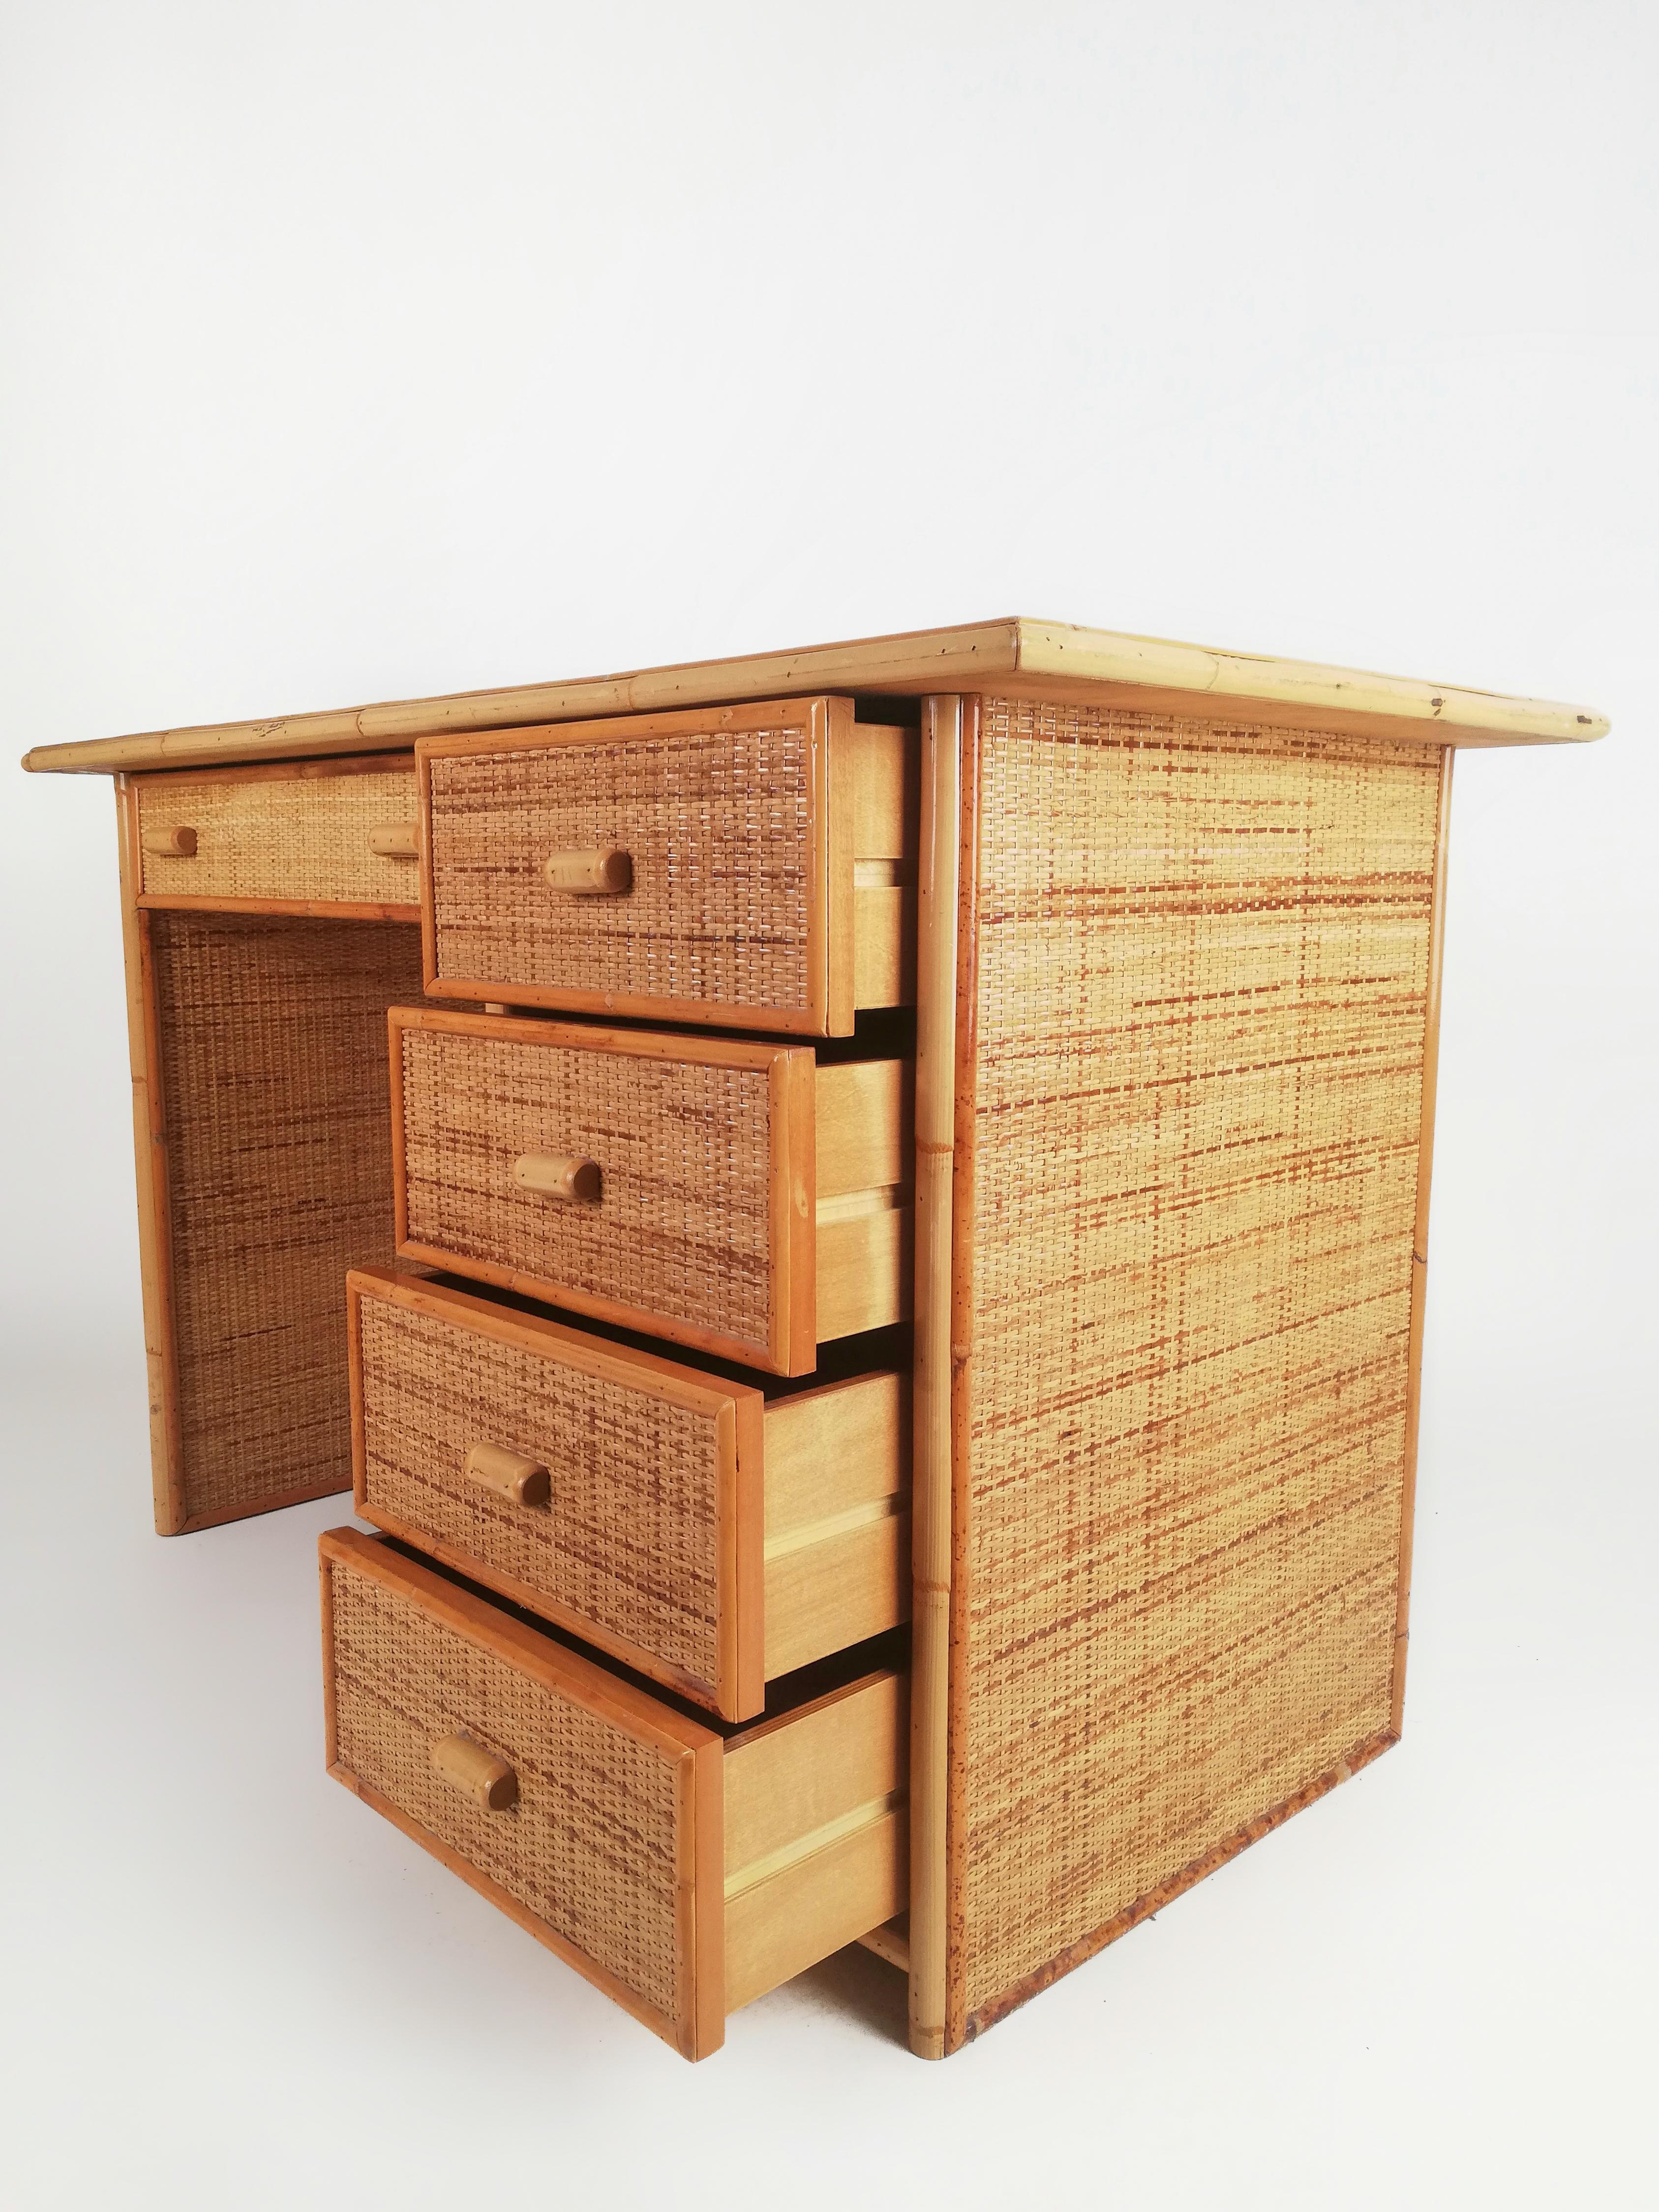 Vintage Italian Writing Desk with Drawers in Bamboo, Rattan and Plywood, 1970s For Sale 2